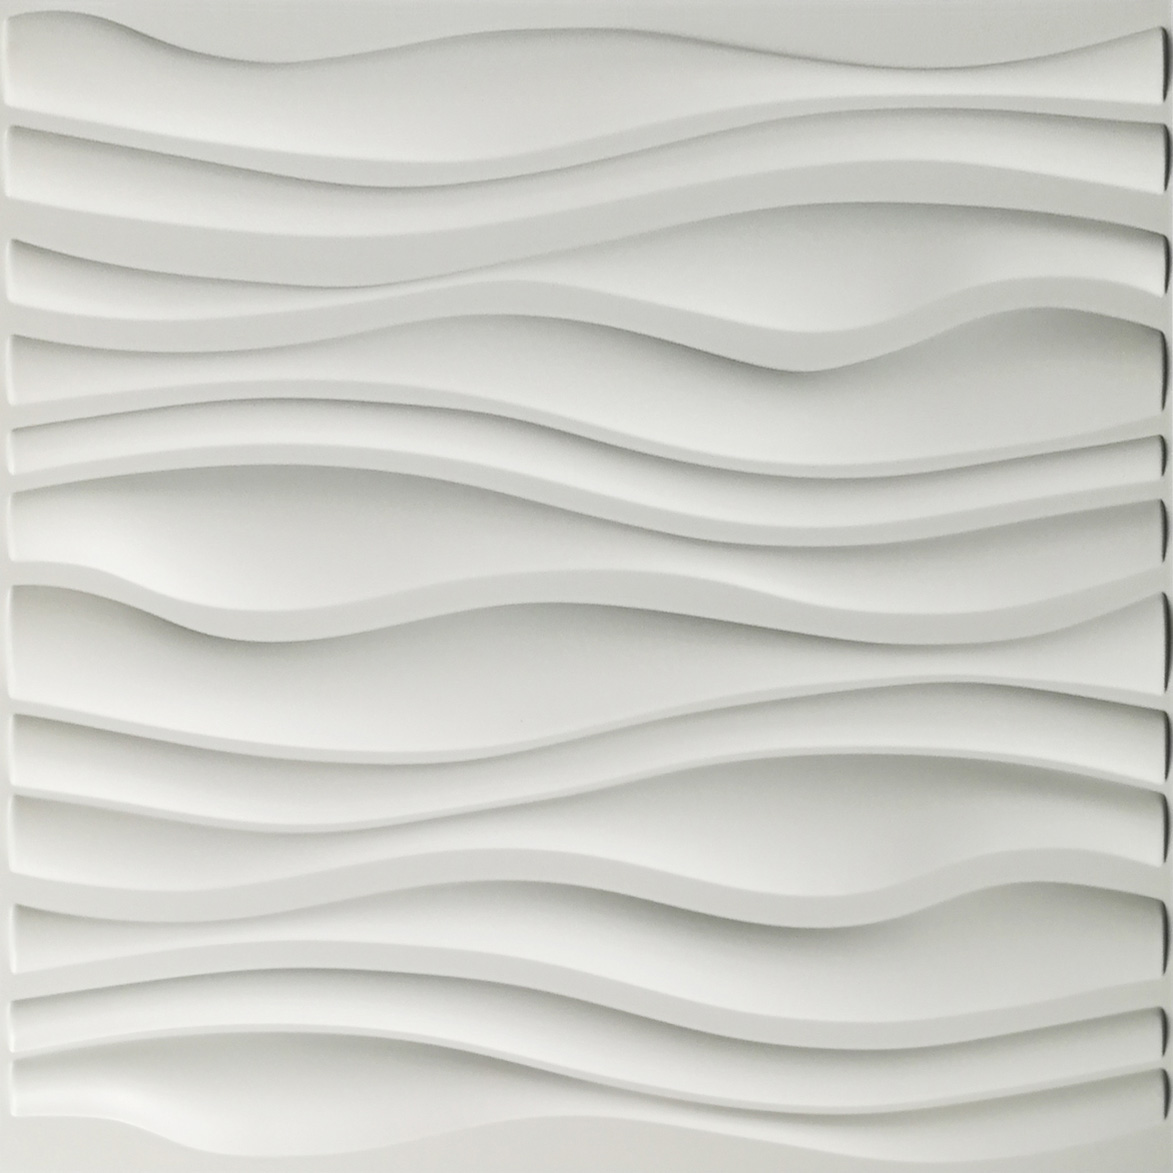 A10037- PVC Wave Board Textured 3D Wall Panels, White Wave, 12 Tiles 32 SF